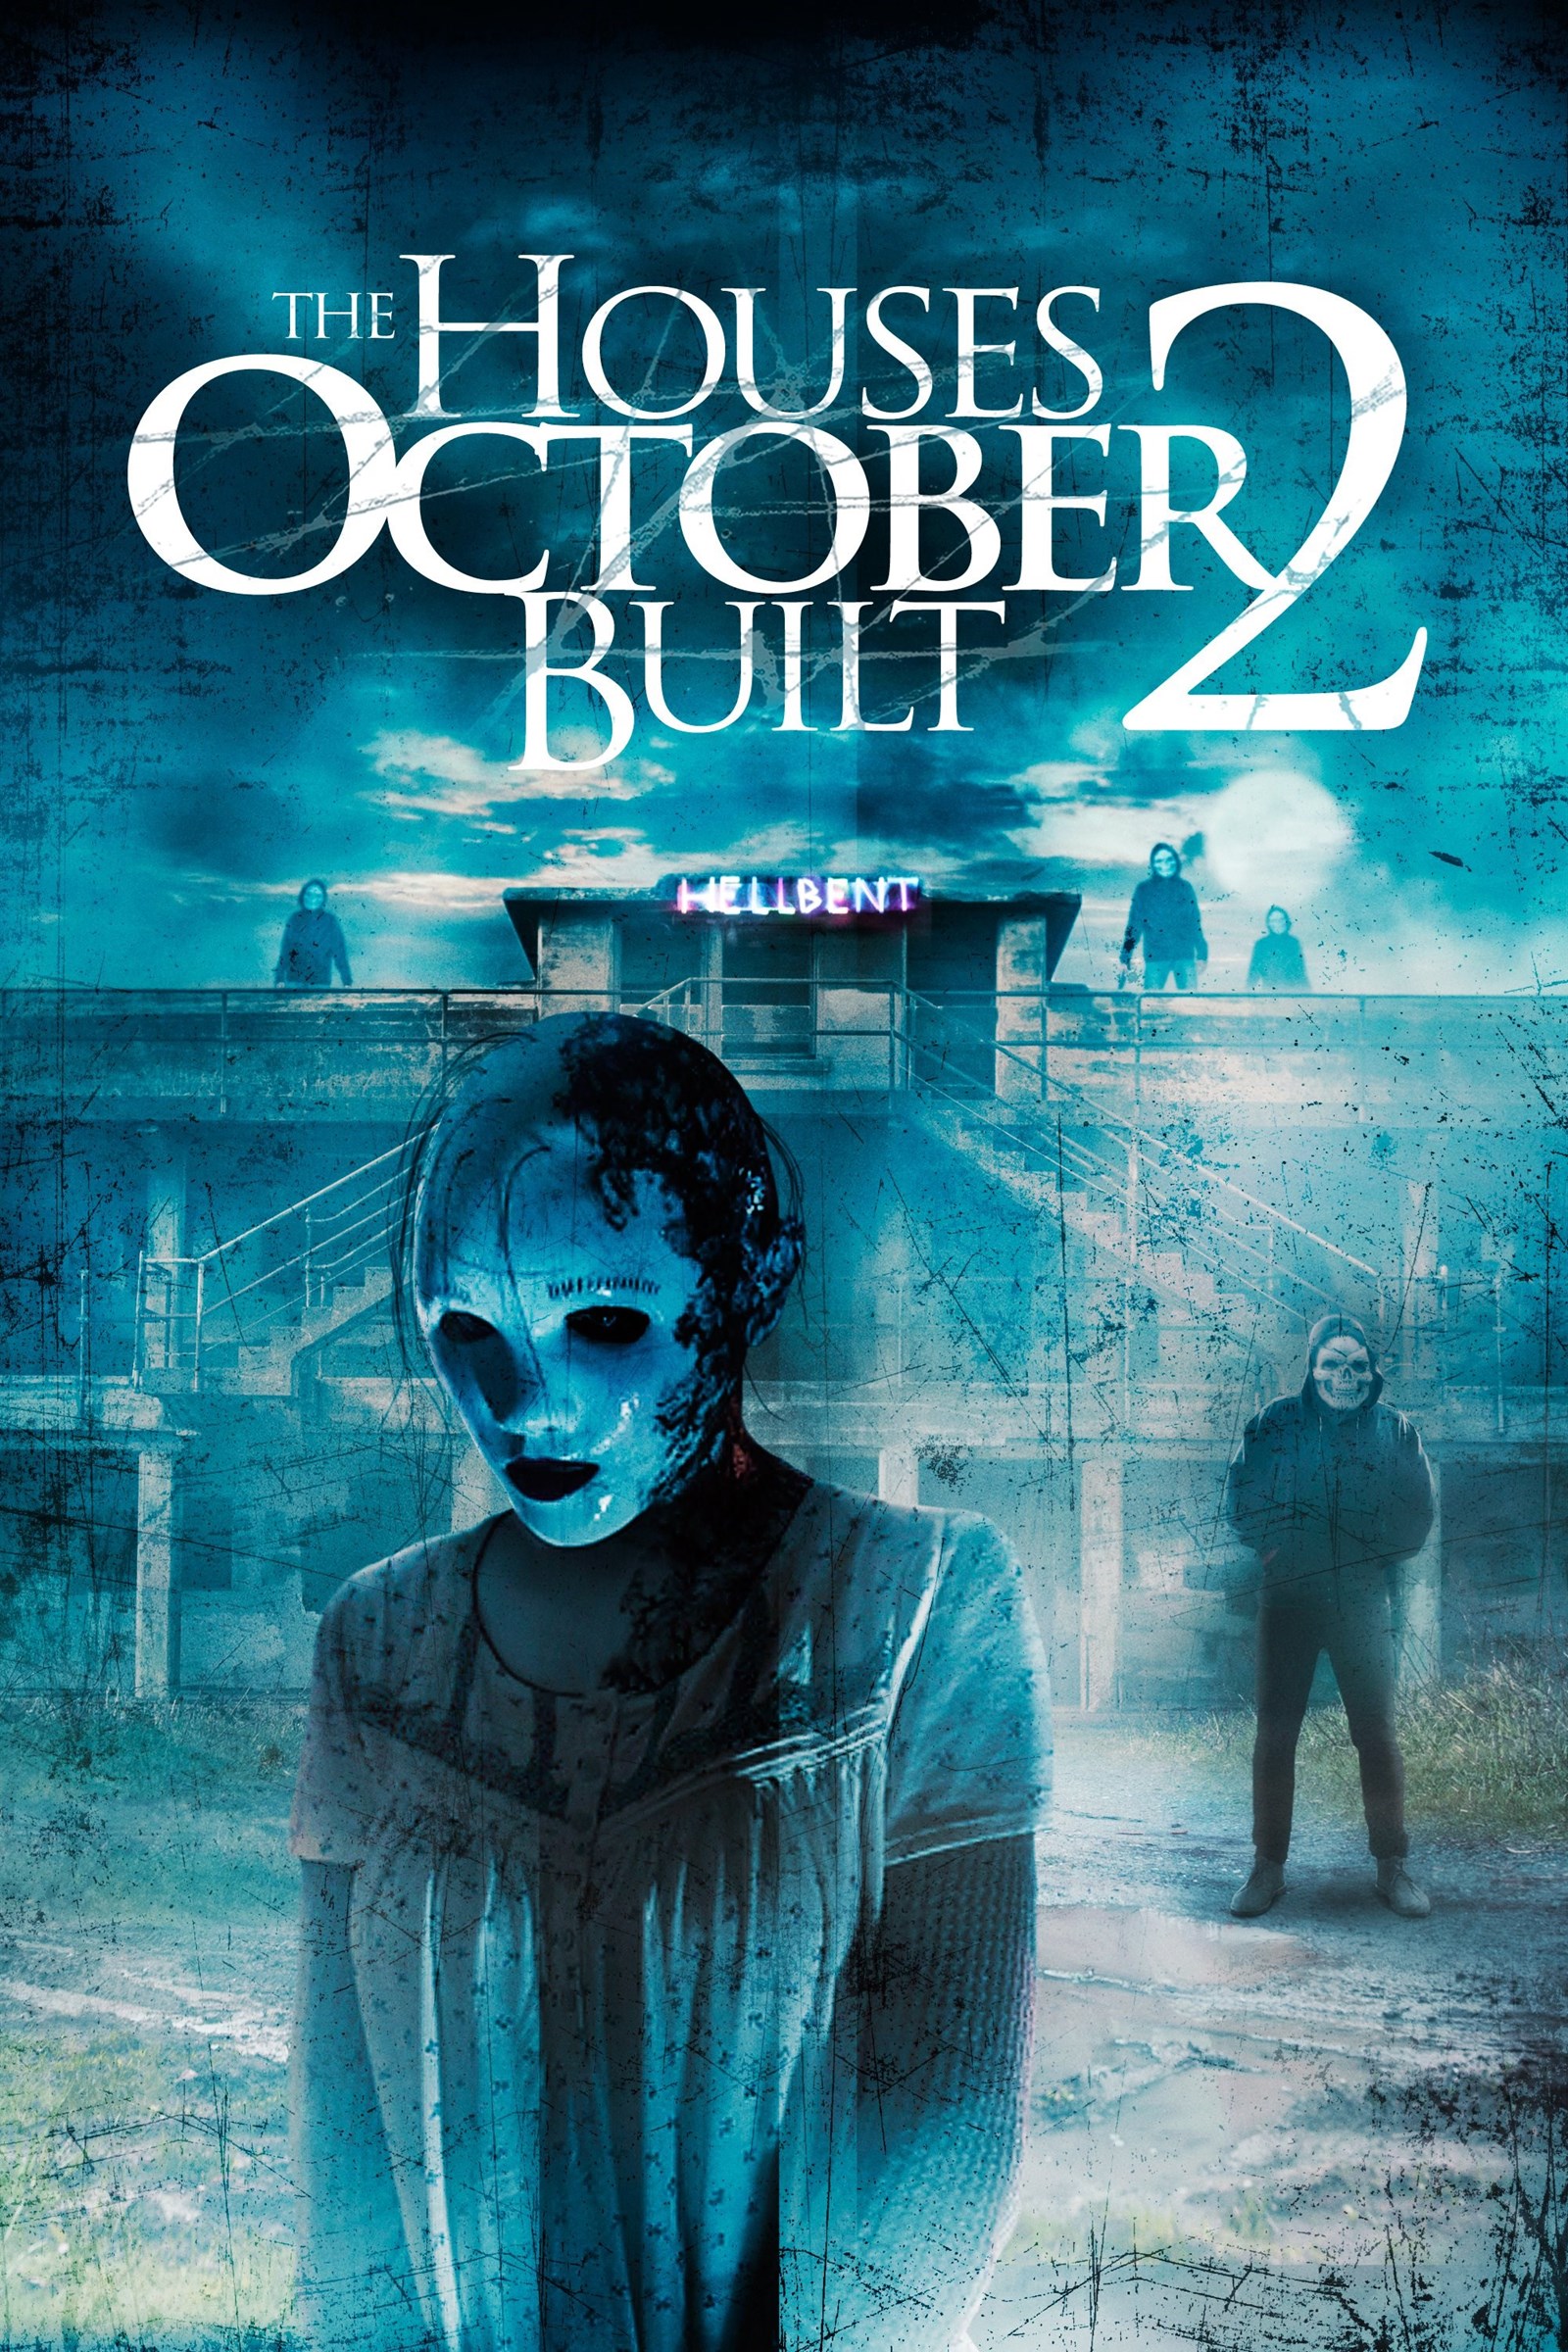 The Houses October Built 2 Review